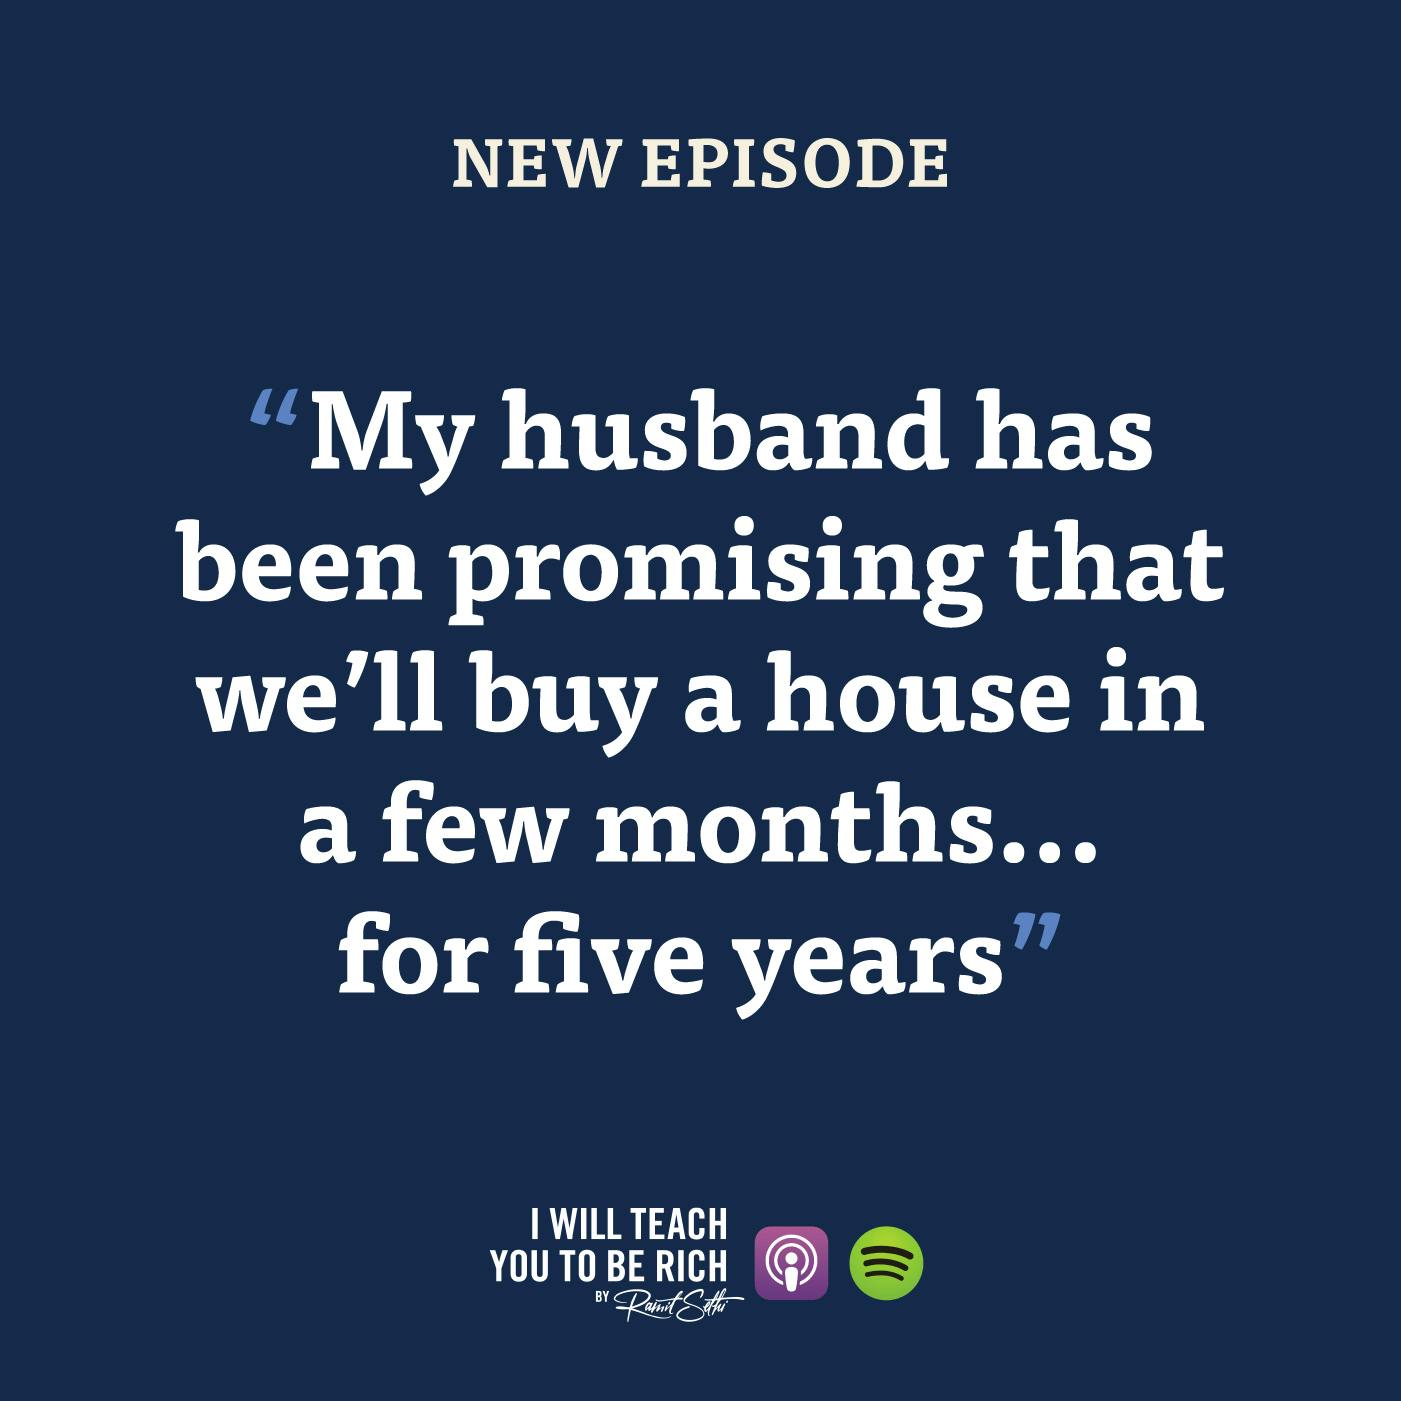 19. “My husband has been promising that we’ll buy a house in a few months… for five years”